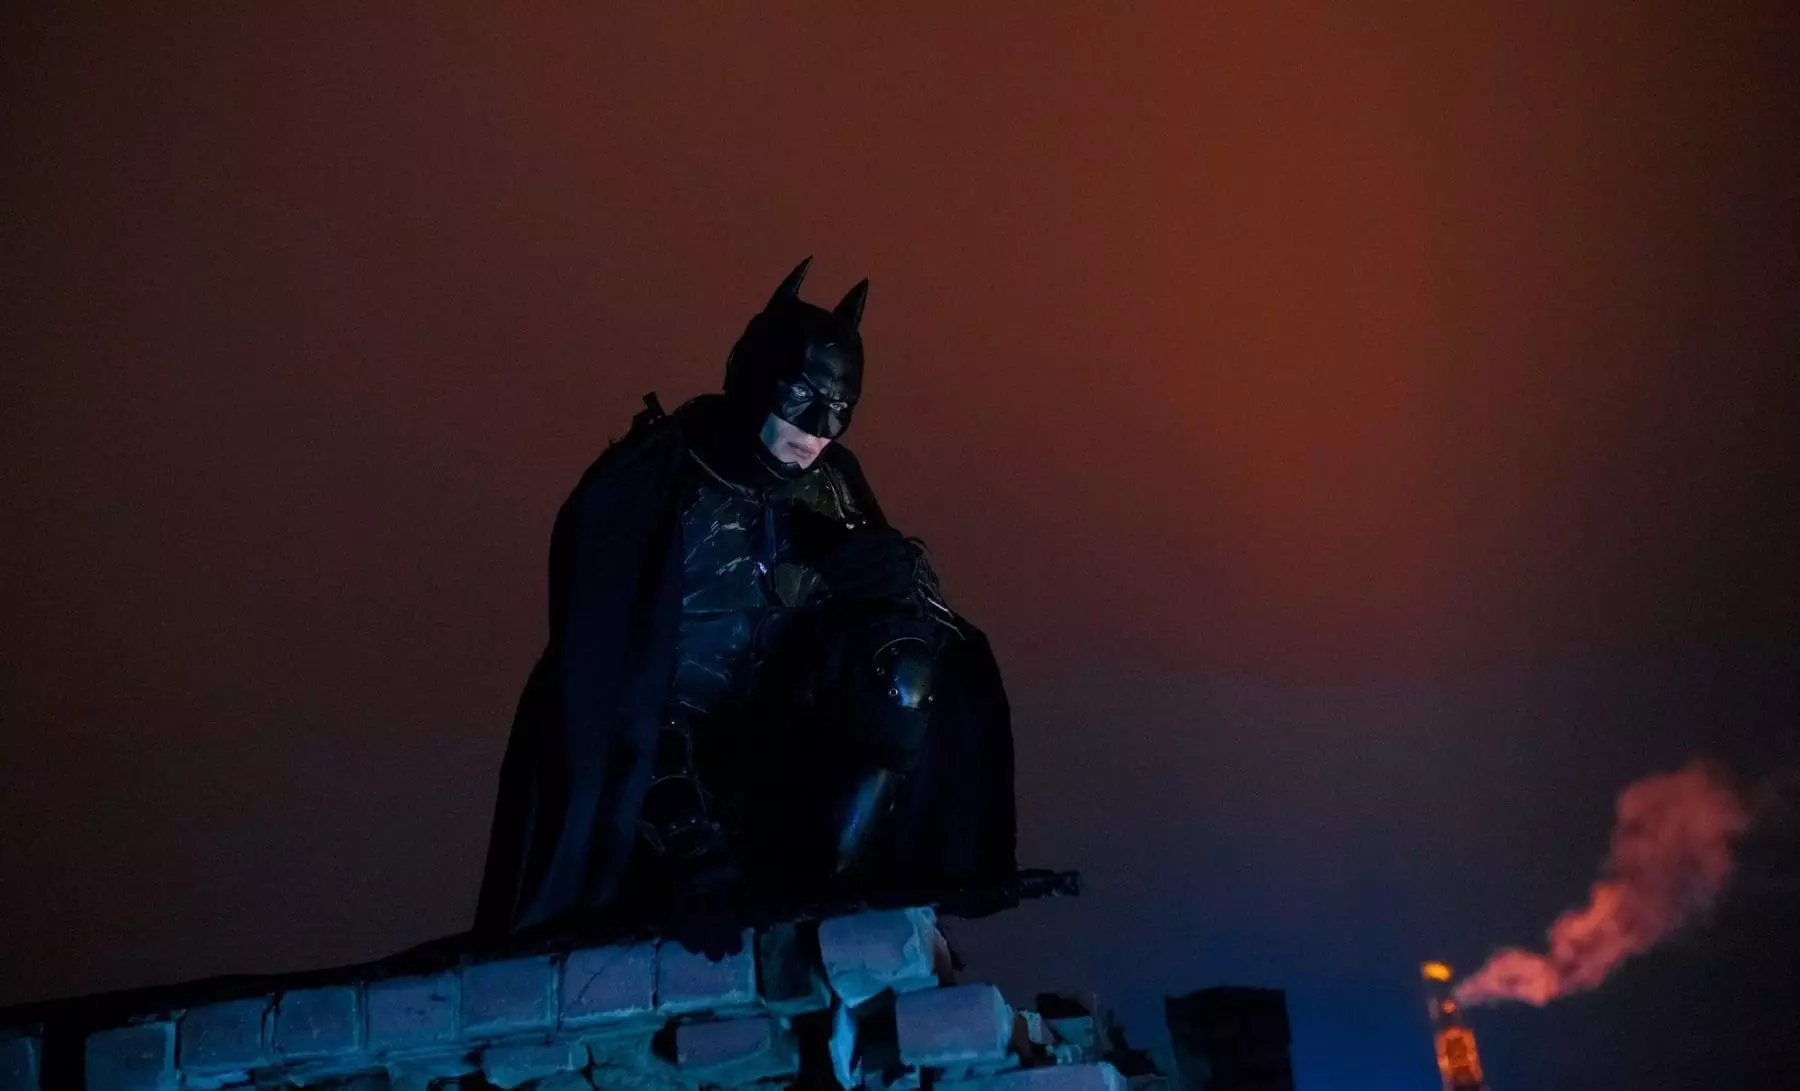 A man dressed as a bat in mask, helmet, armor and black cloak sits at the top of the building against the background of night lights and sky. Cosplay.